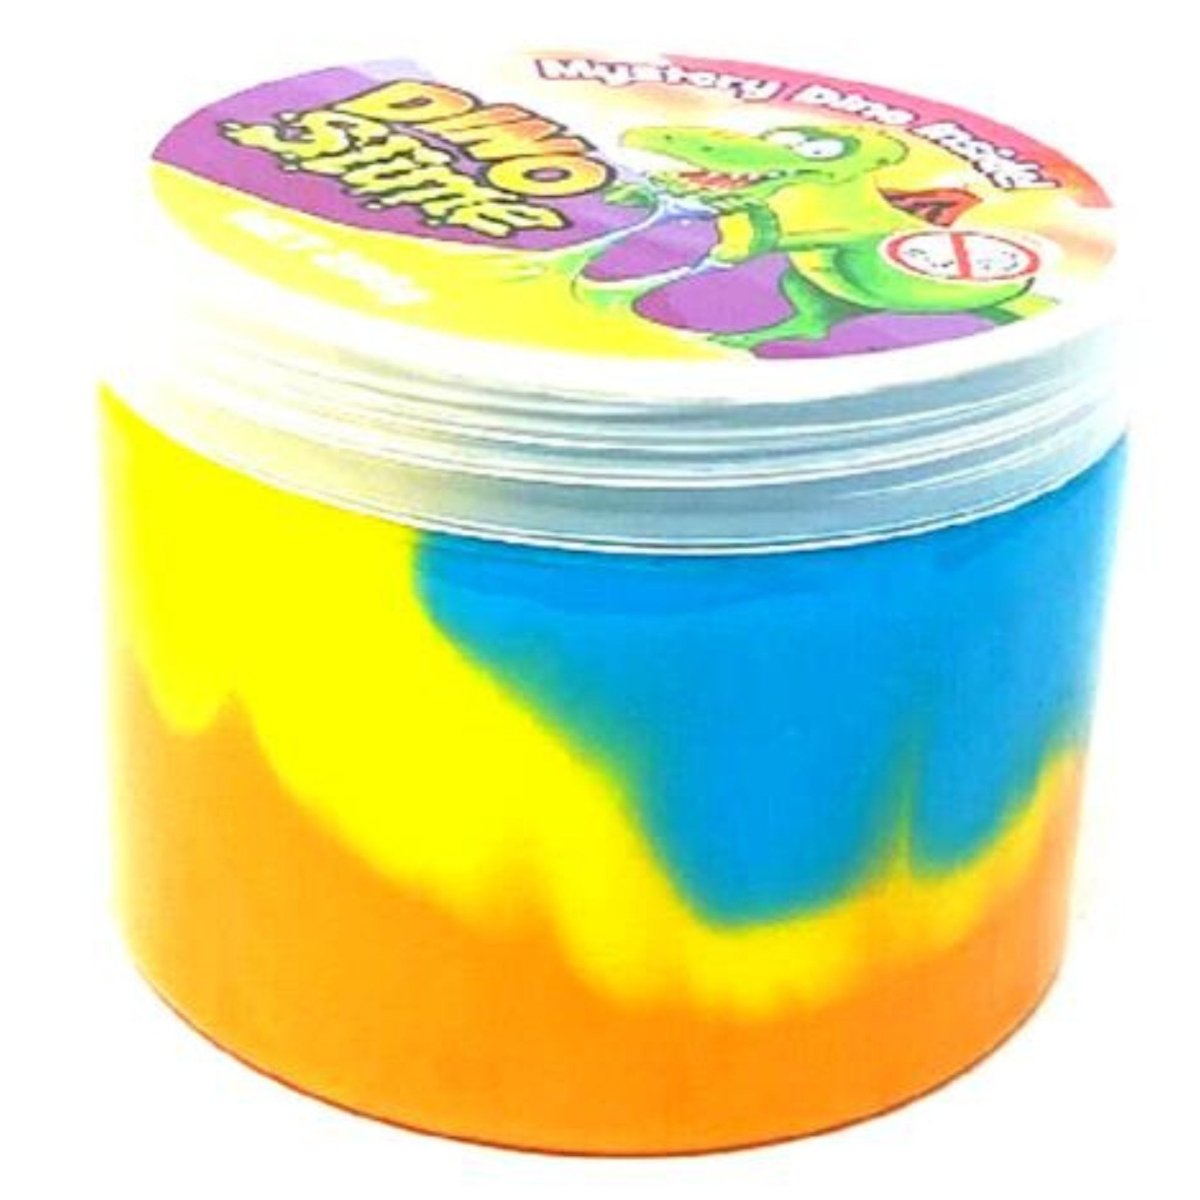 Large Dino Slime Tub With Mystery Dinosaur Inside - Kids Party Craft